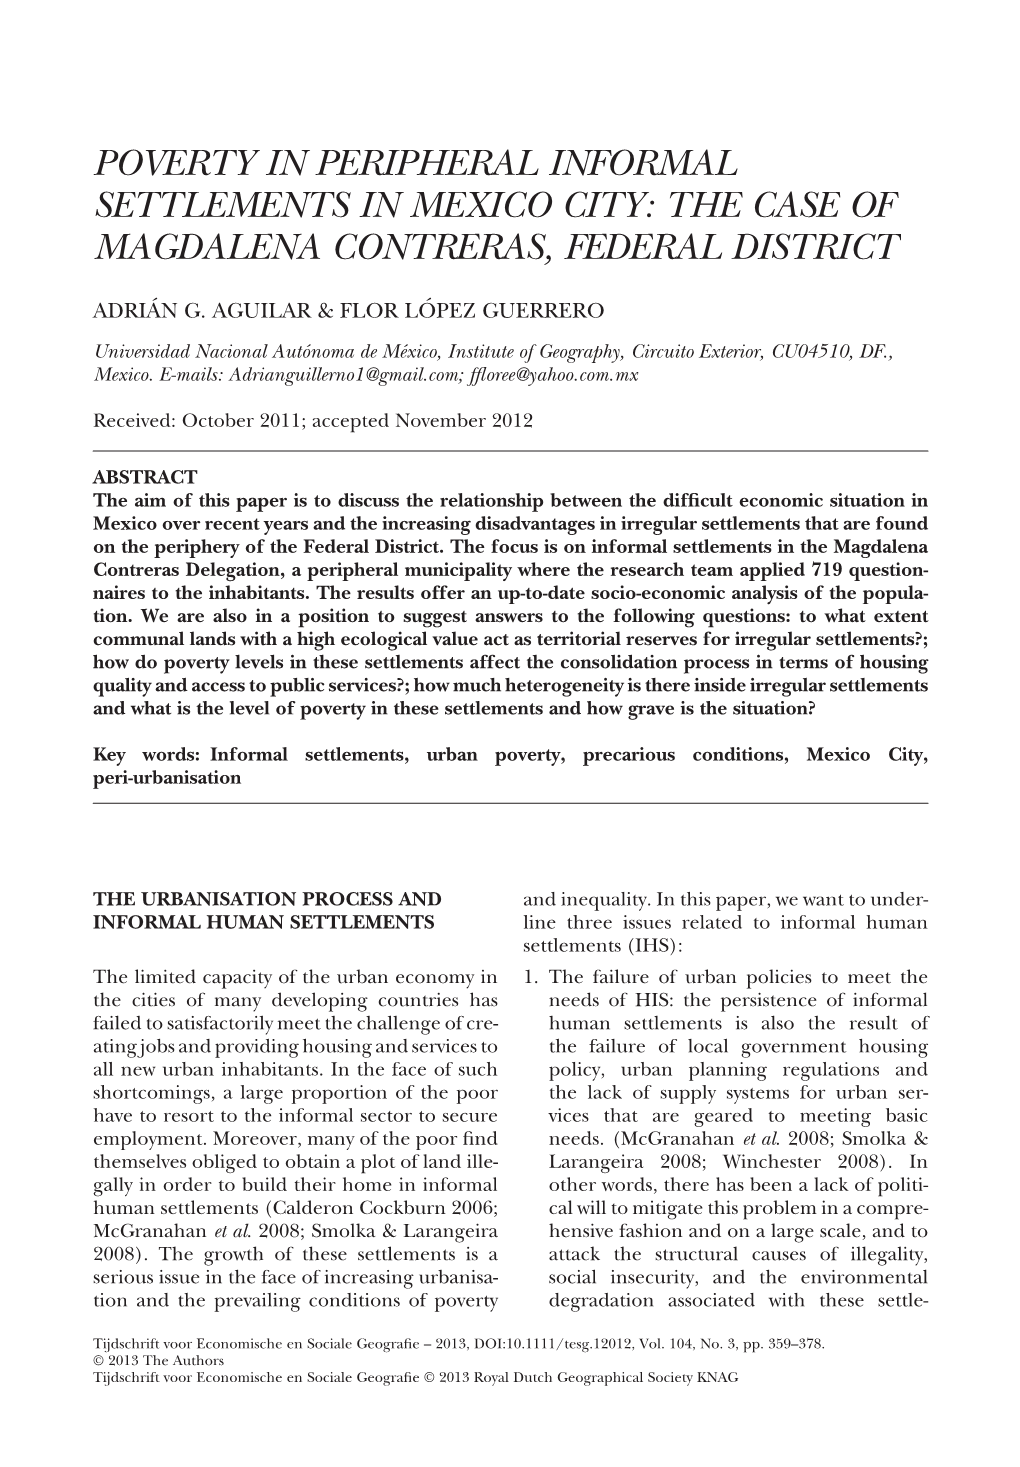 Poverty in Peripheral Informal Settlements in Mexico City: the Case of Magdalena Contreras, Federal District